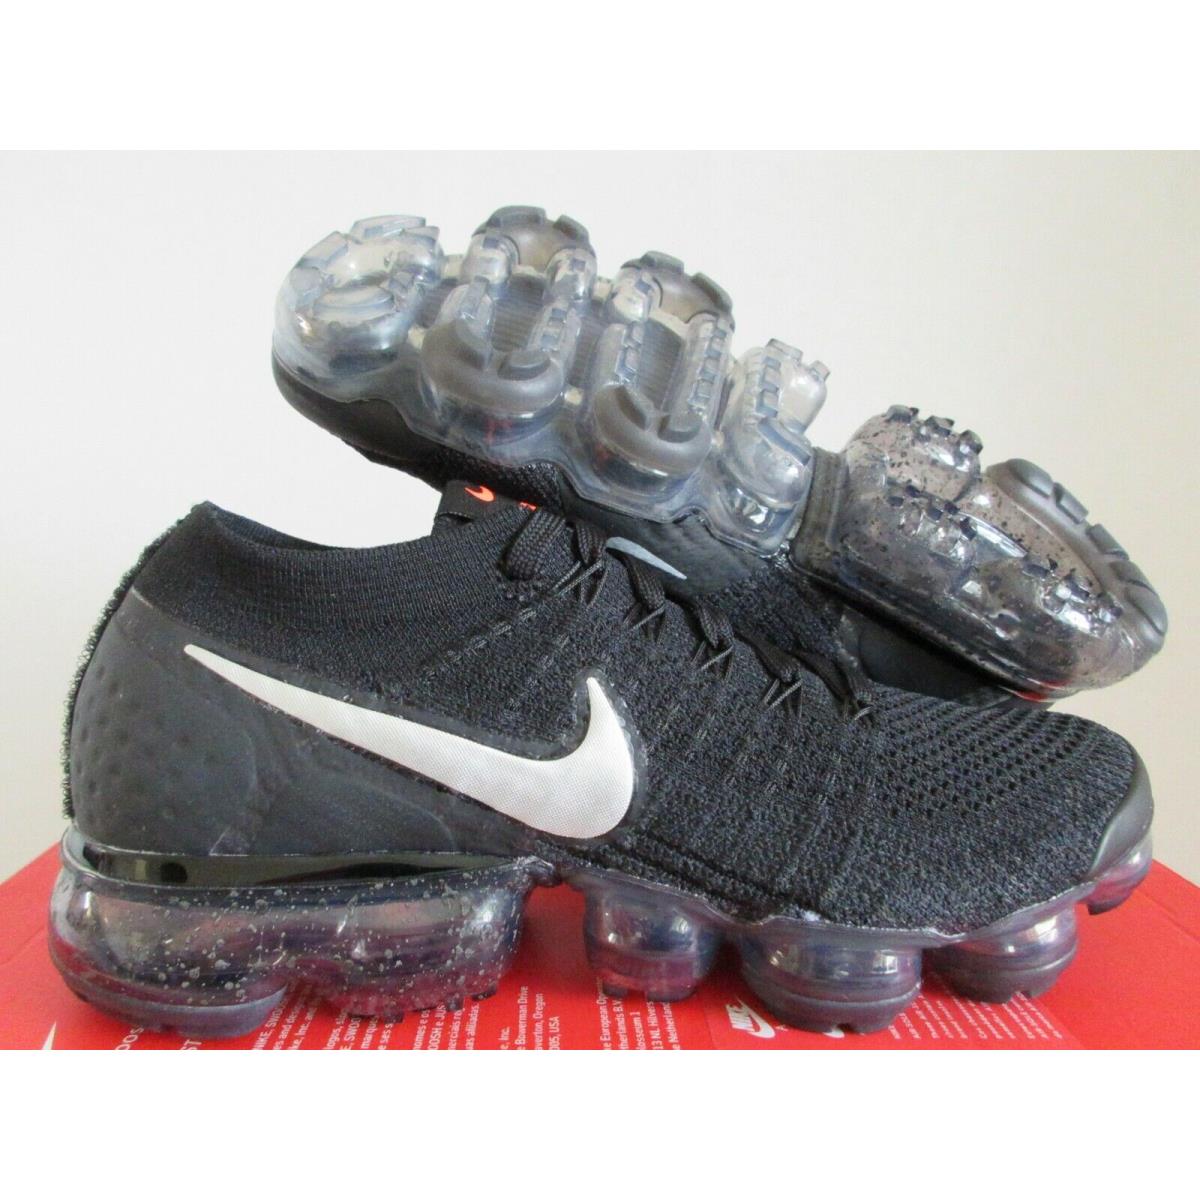 Nike shoes Air Vapormax Flyknit - Silver 0